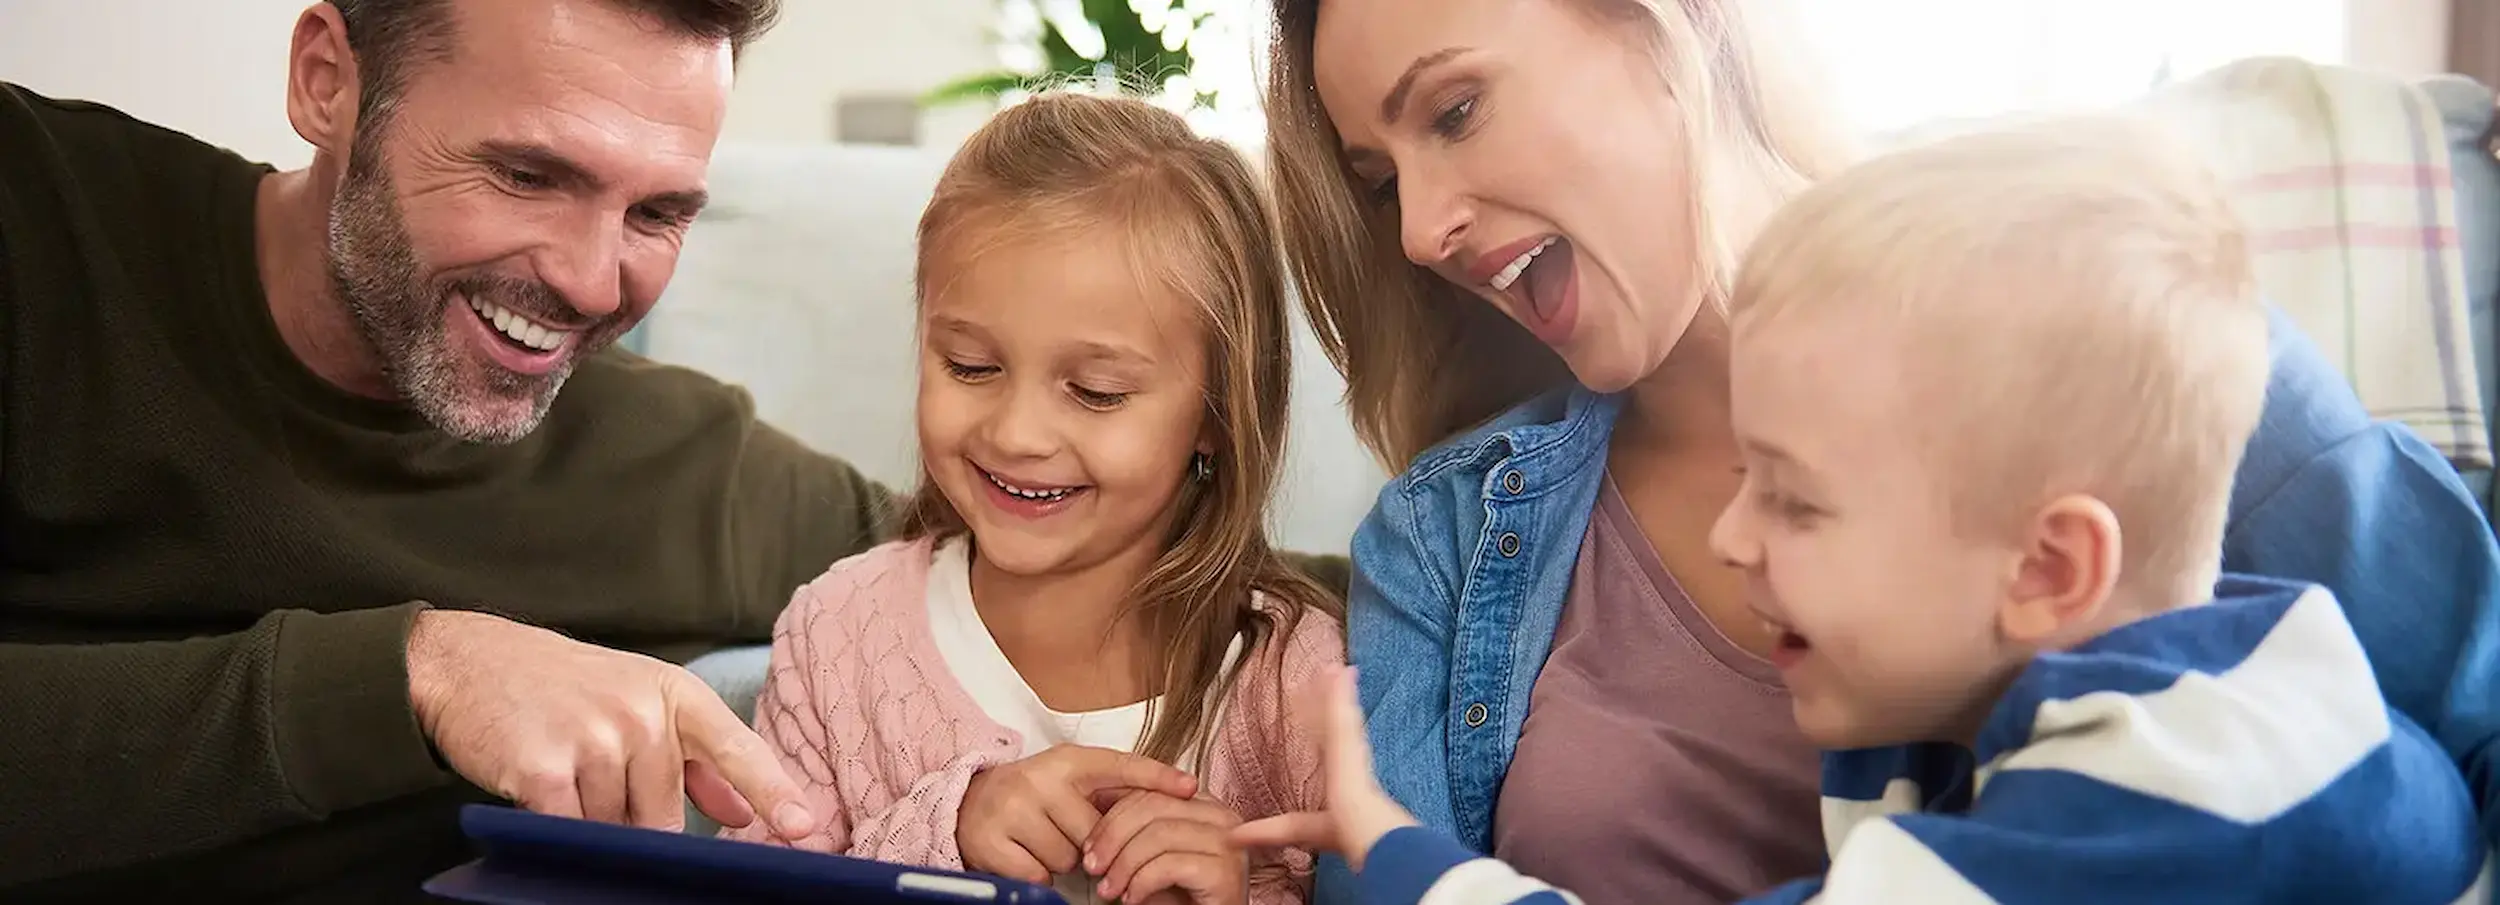 Smiling family of four pointing at tablet device in brightly lit interior.